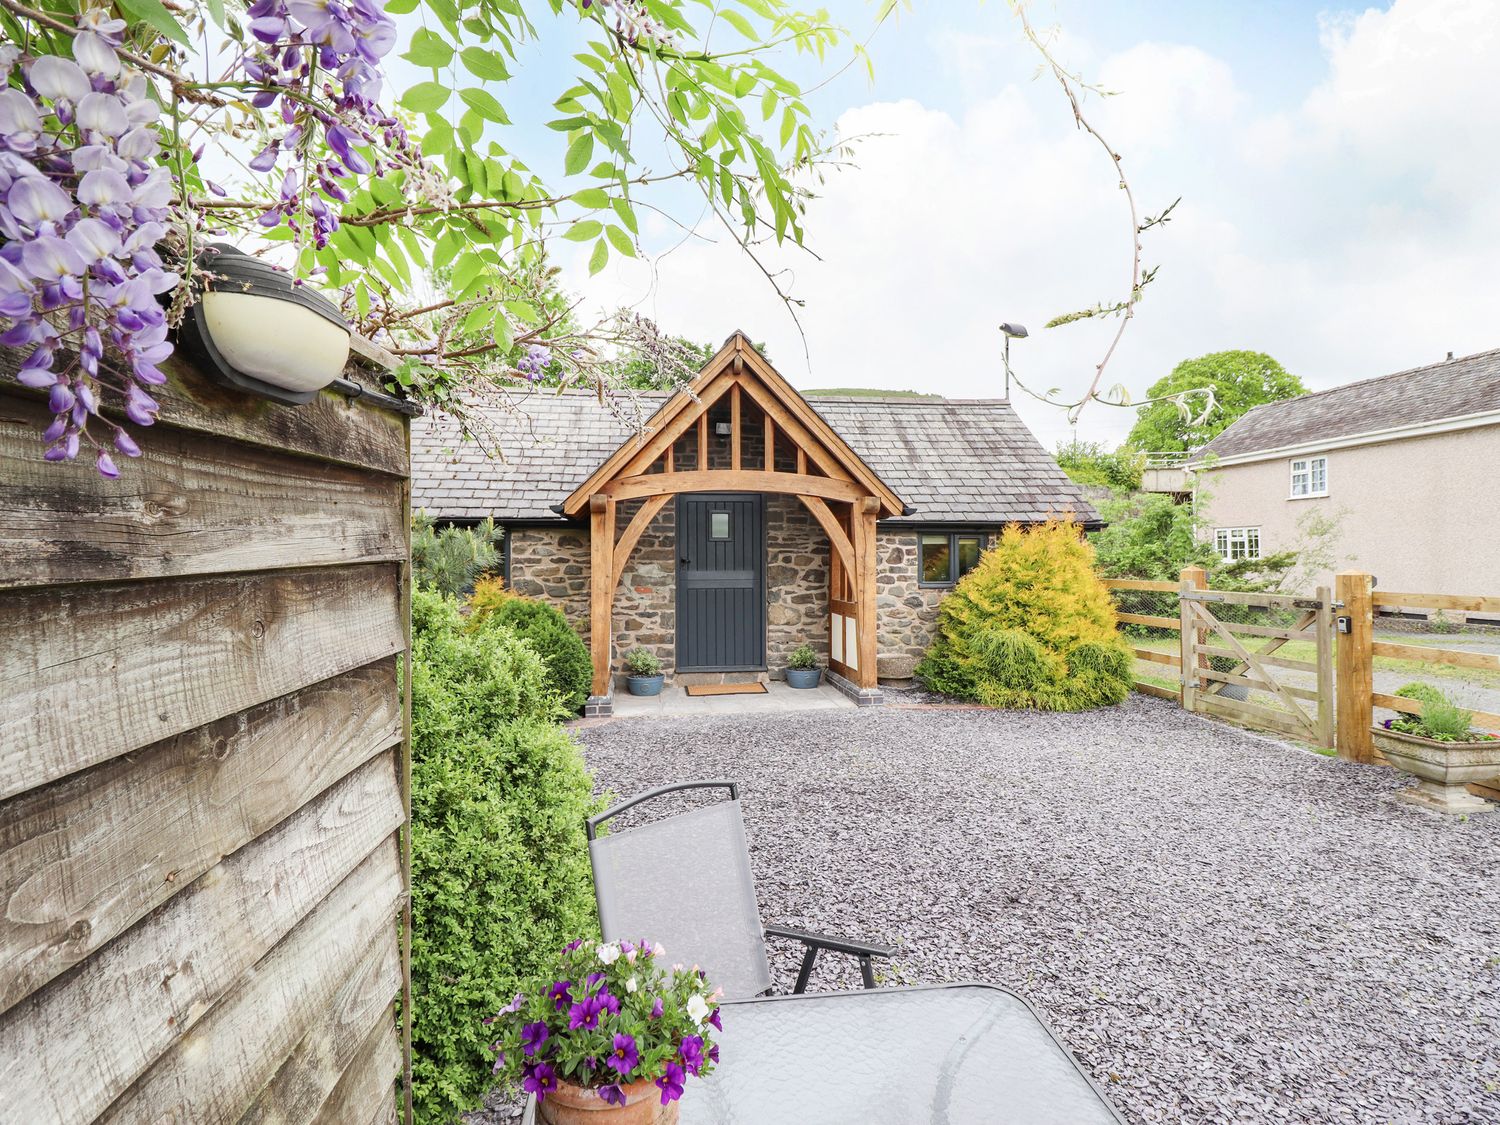 The Talkhouse Cottage - Mid Wales - 906681 - photo 1